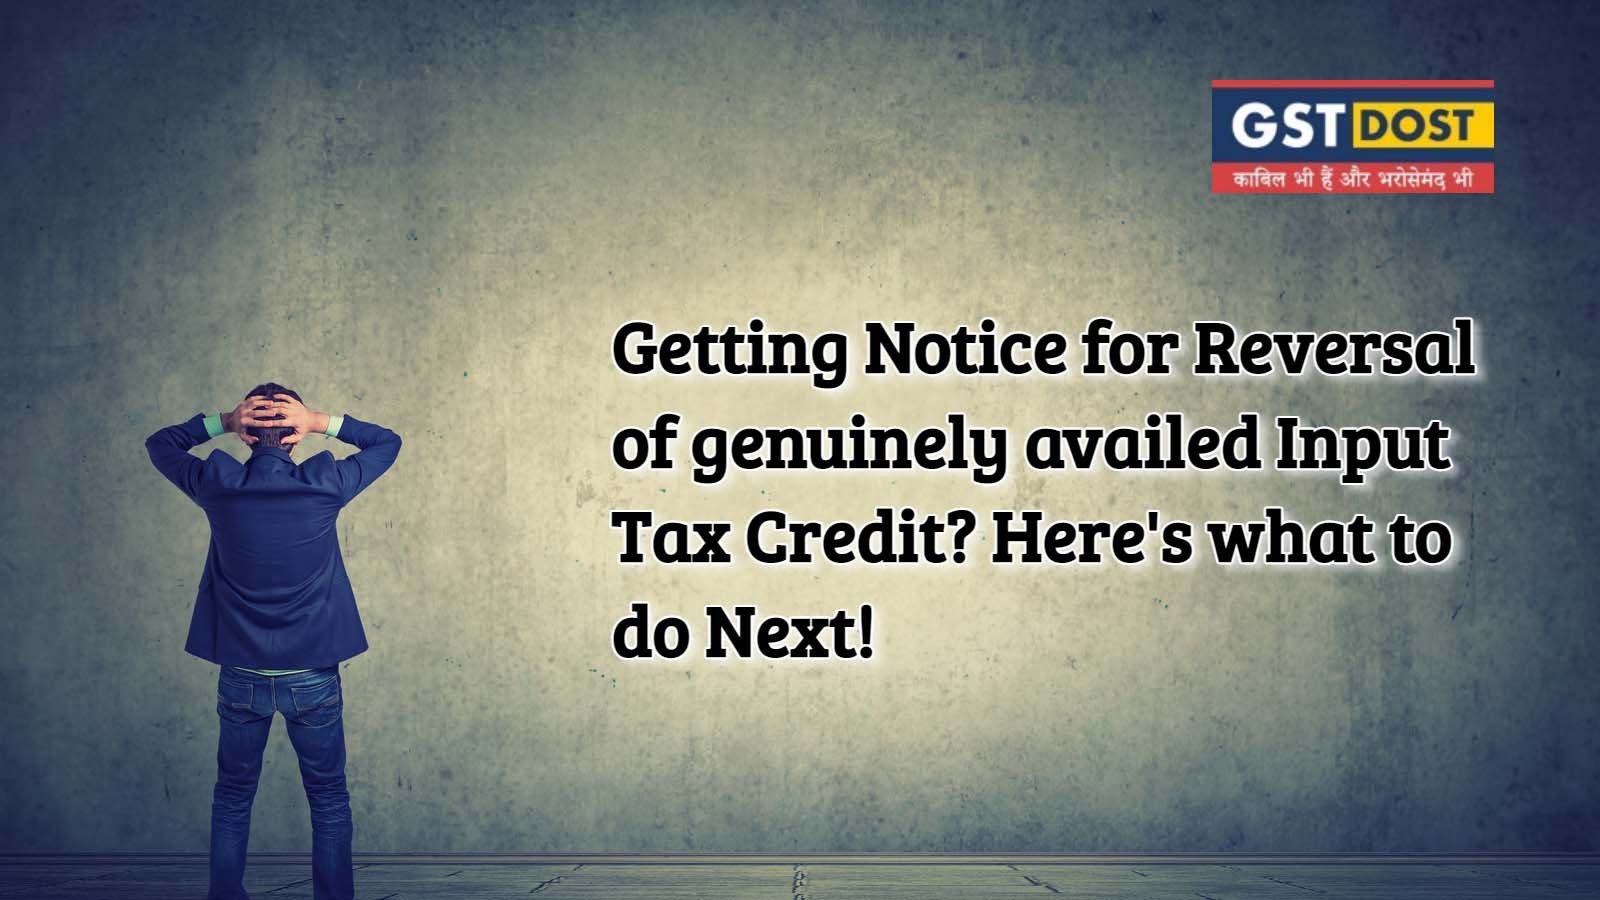 Getting Notice for Reversal of genuinely availed Input Tax Credit? Here's what to do Next!